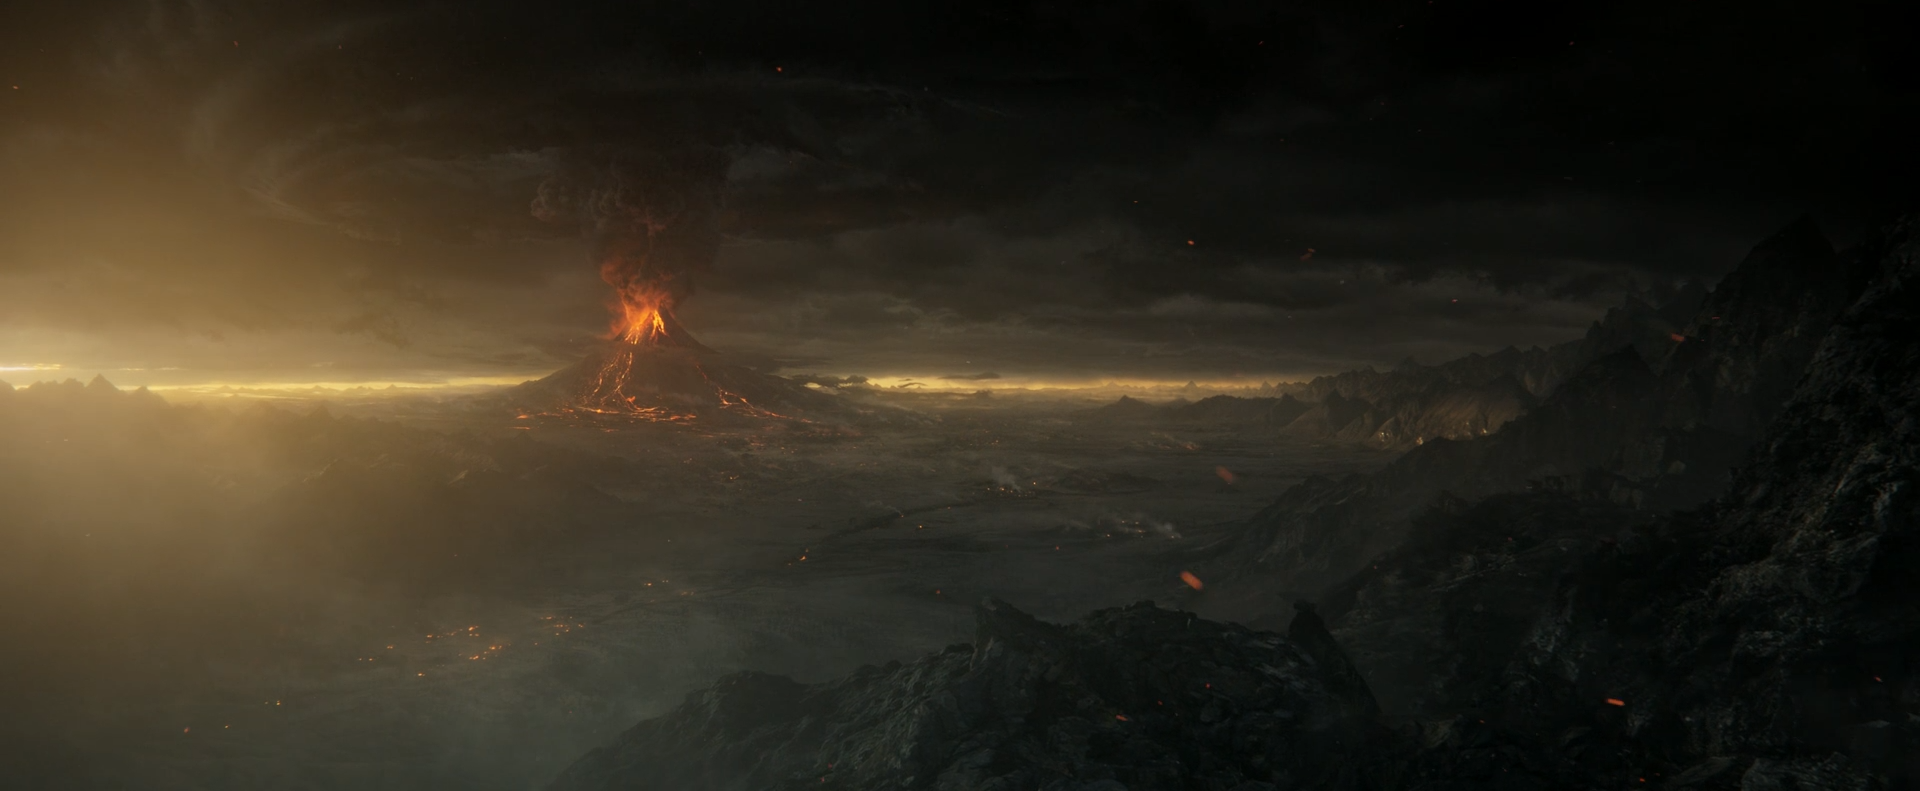 Wallpaper Sauron Mordor Video Games Darkness Middle Earth Shadow of  War Background  Download Free Image